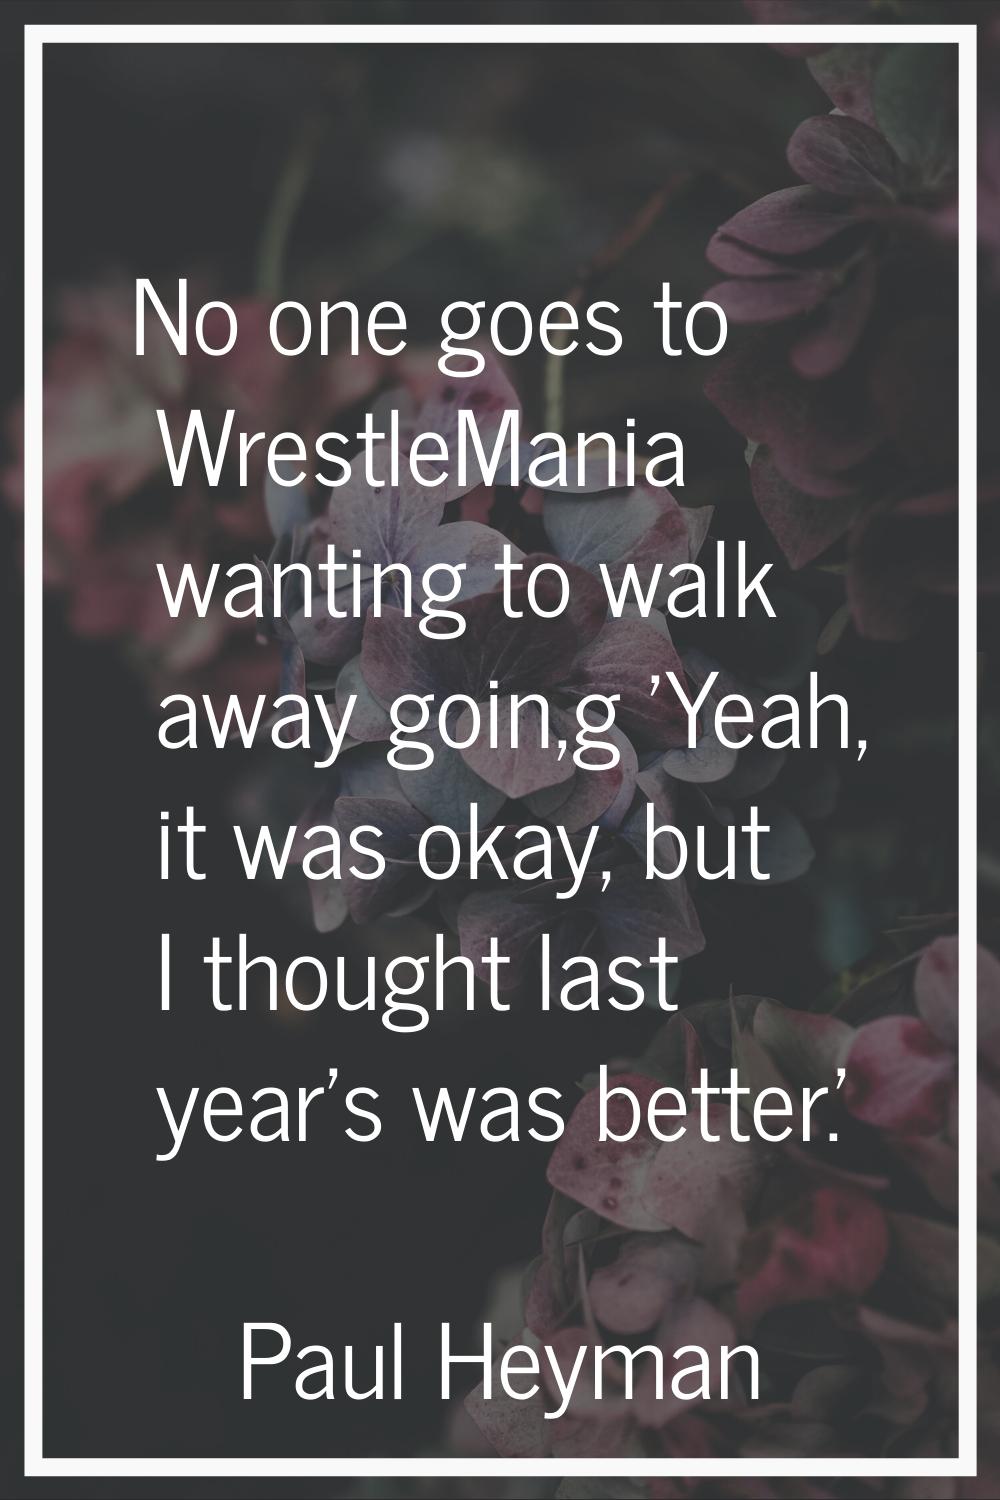 No one goes to WrestleMania wanting to walk away goin,g 'Yeah, it was okay, but I thought last year